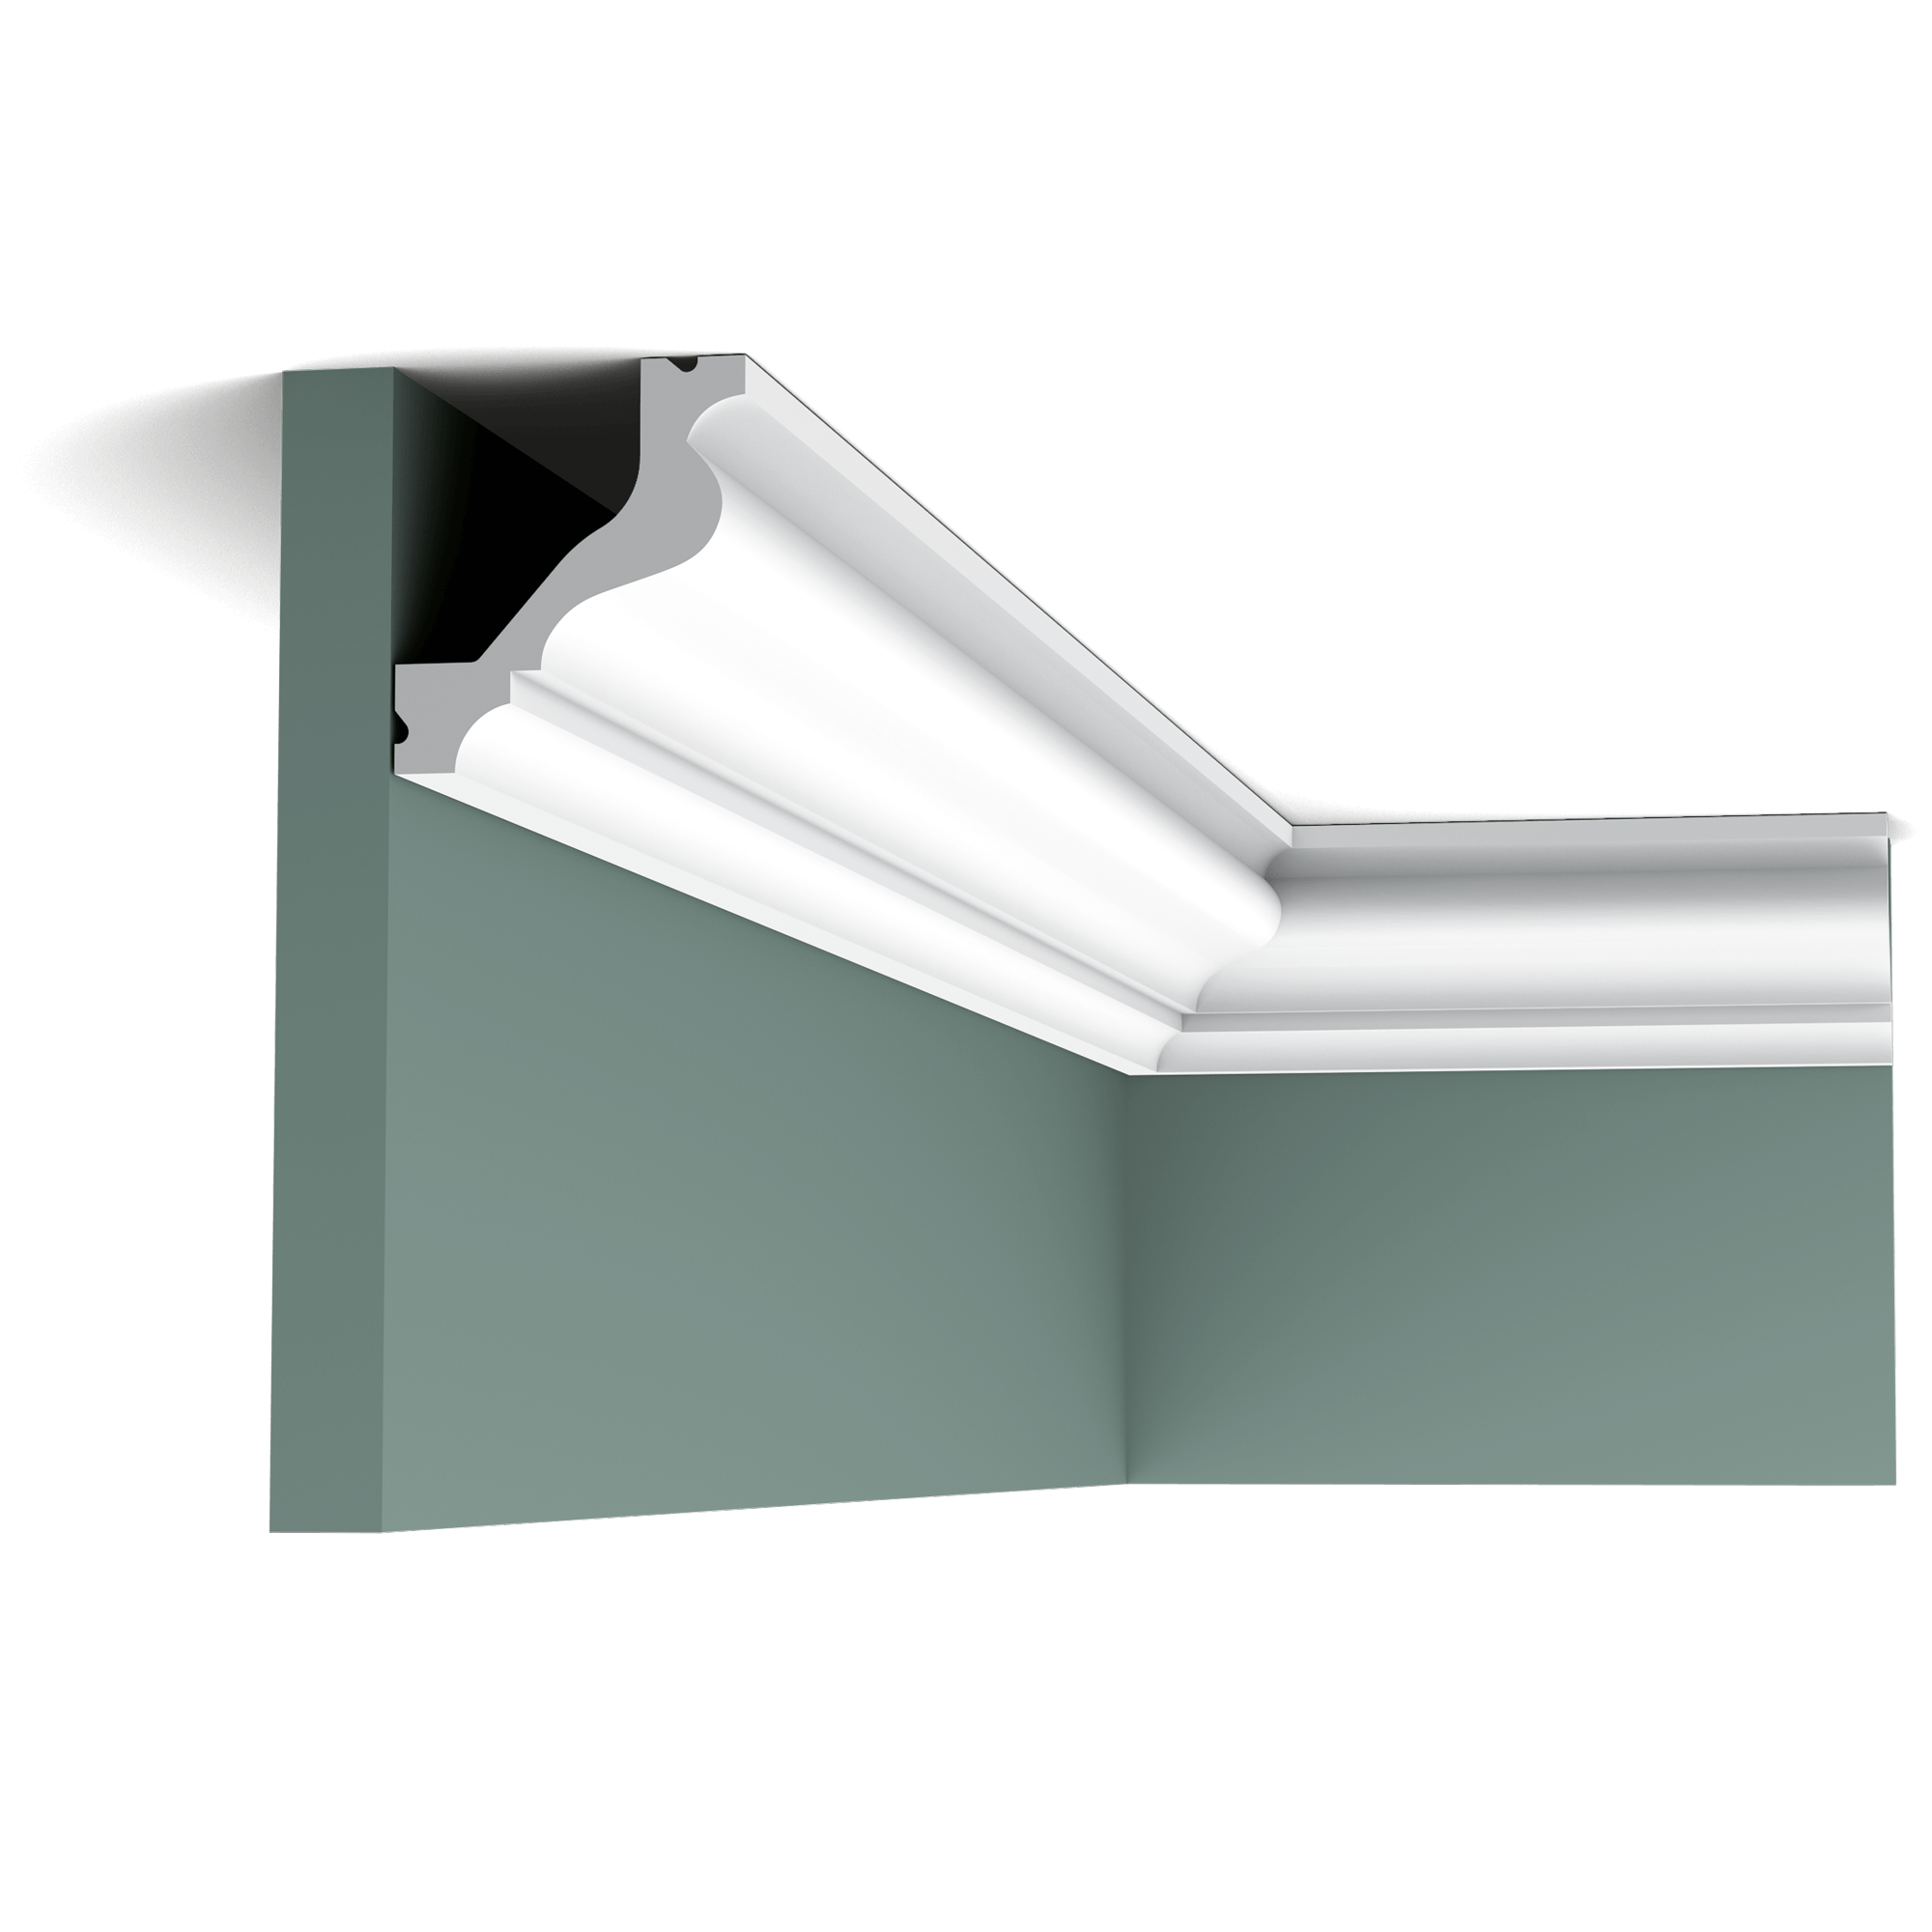 c200 cornice moulding 1662 This elegant, classic profile is one of our most popular cornice mouldings. The timeless design fits any decorating style.